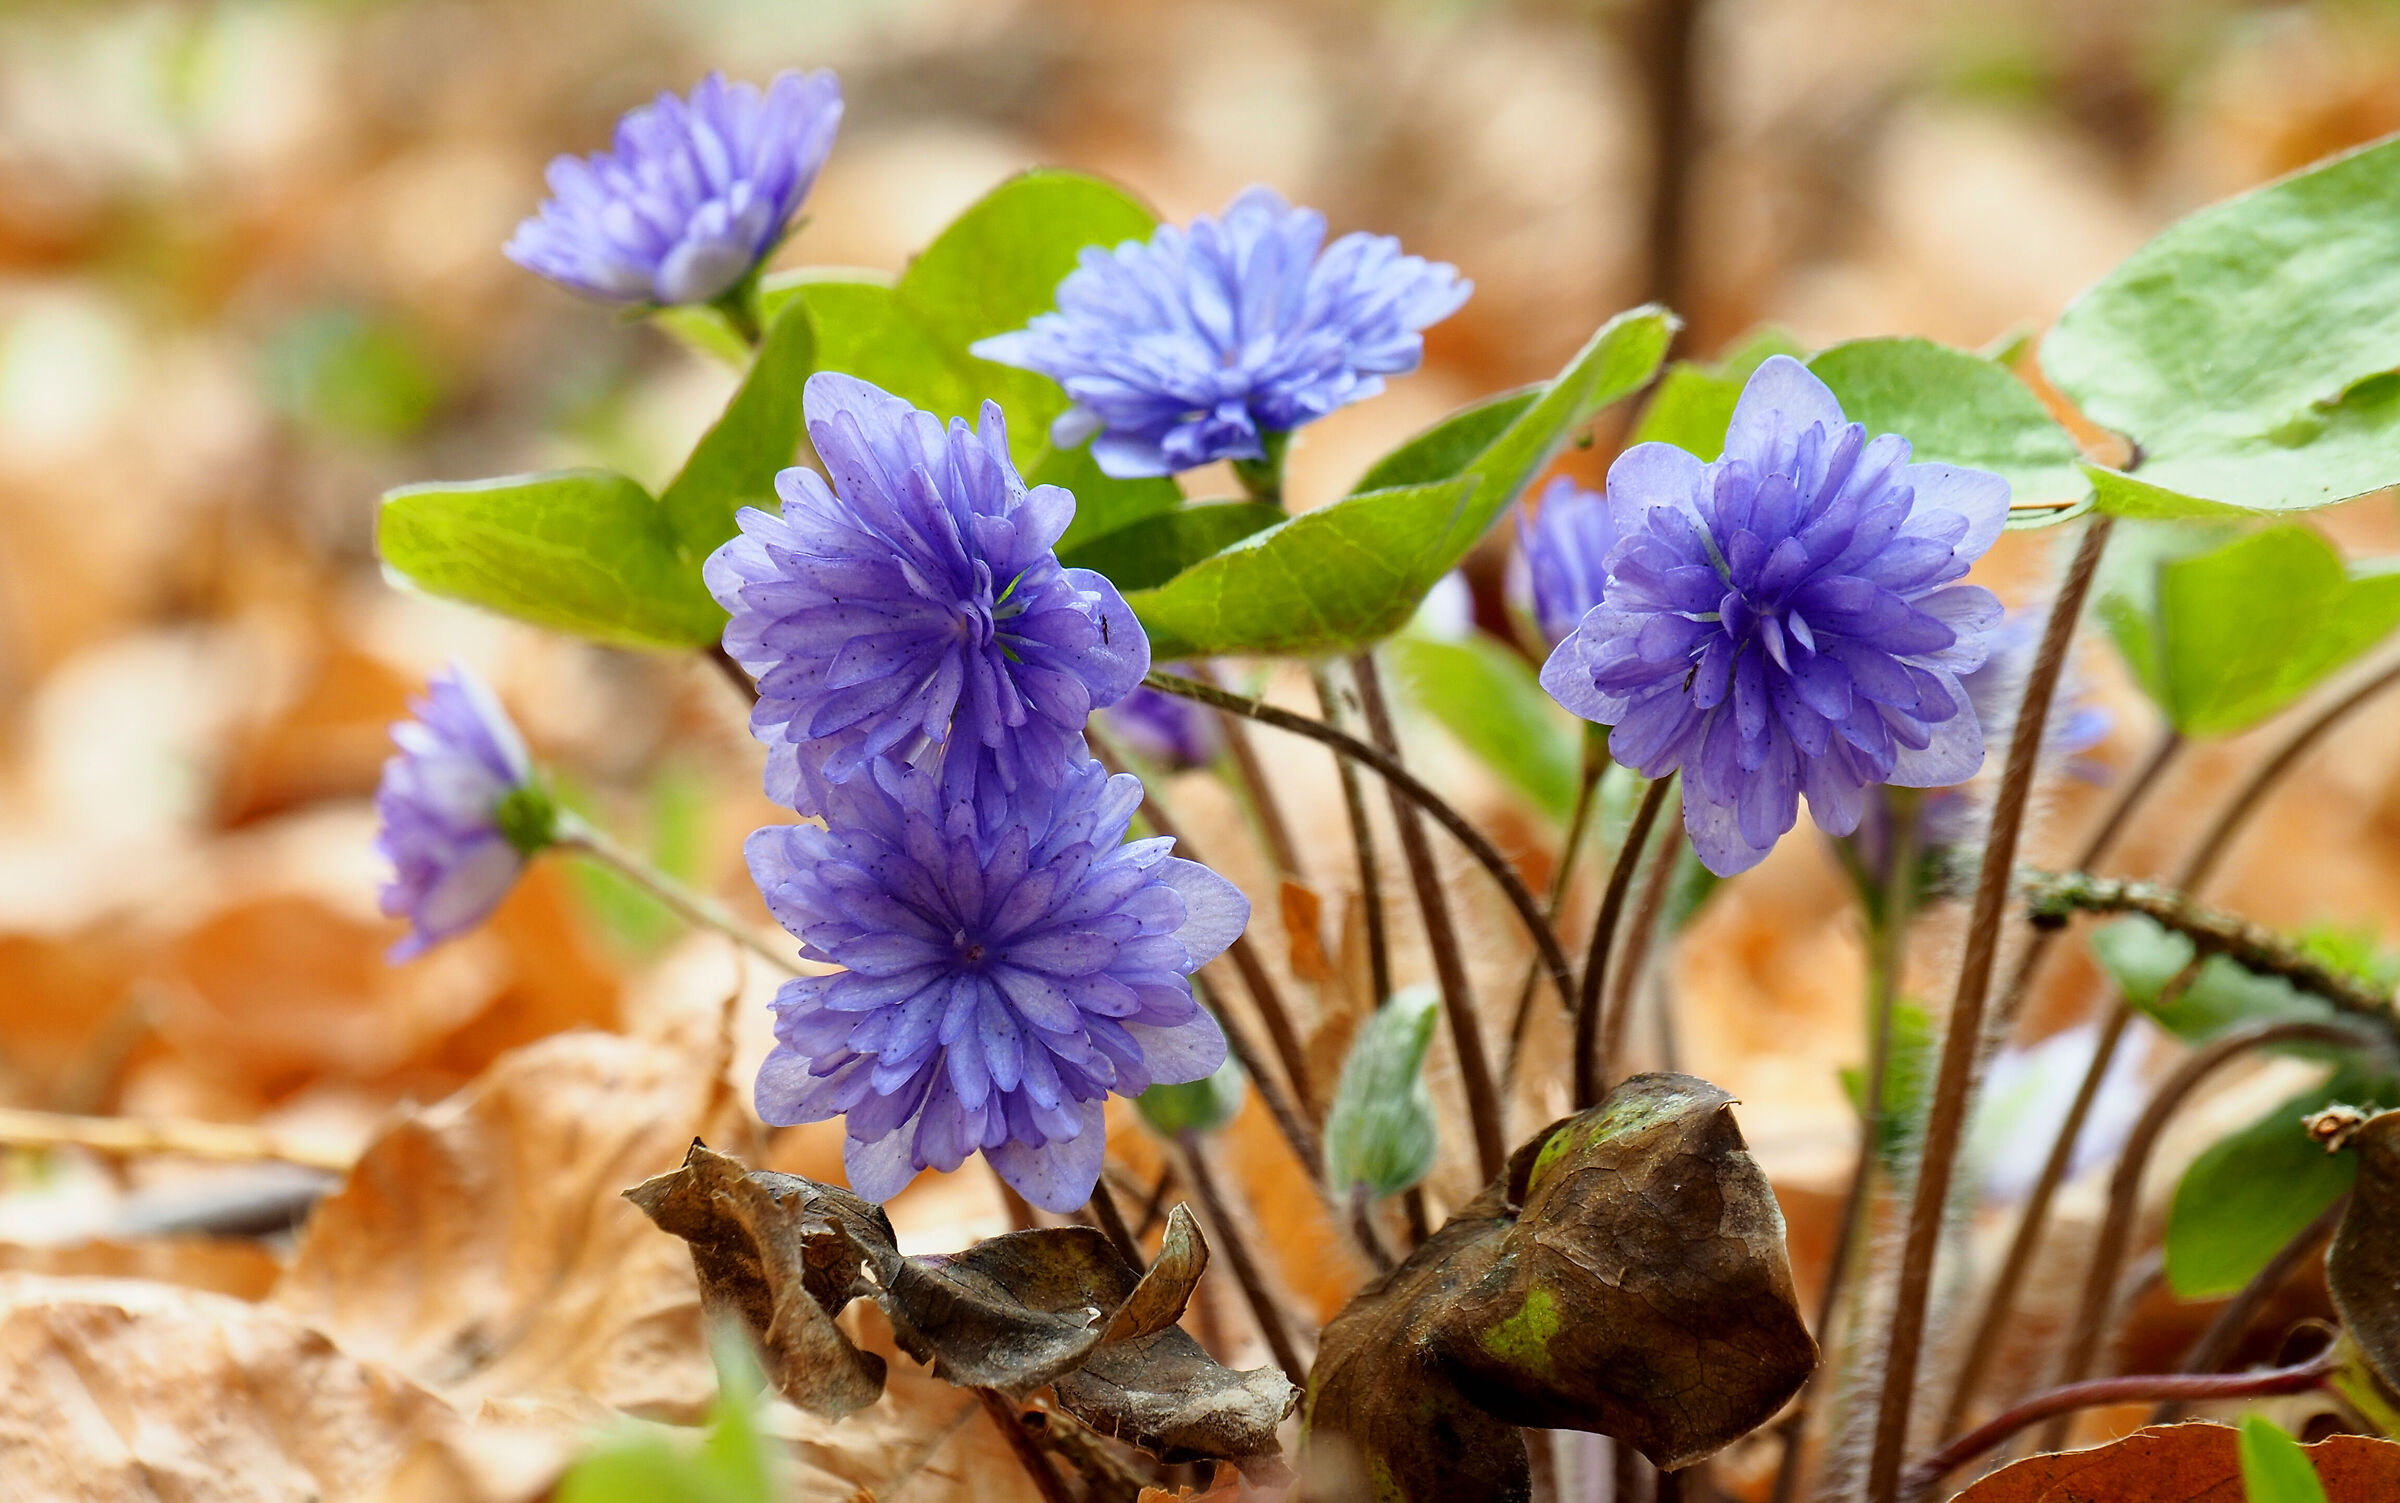 Hepatica nobilis "out of order"......